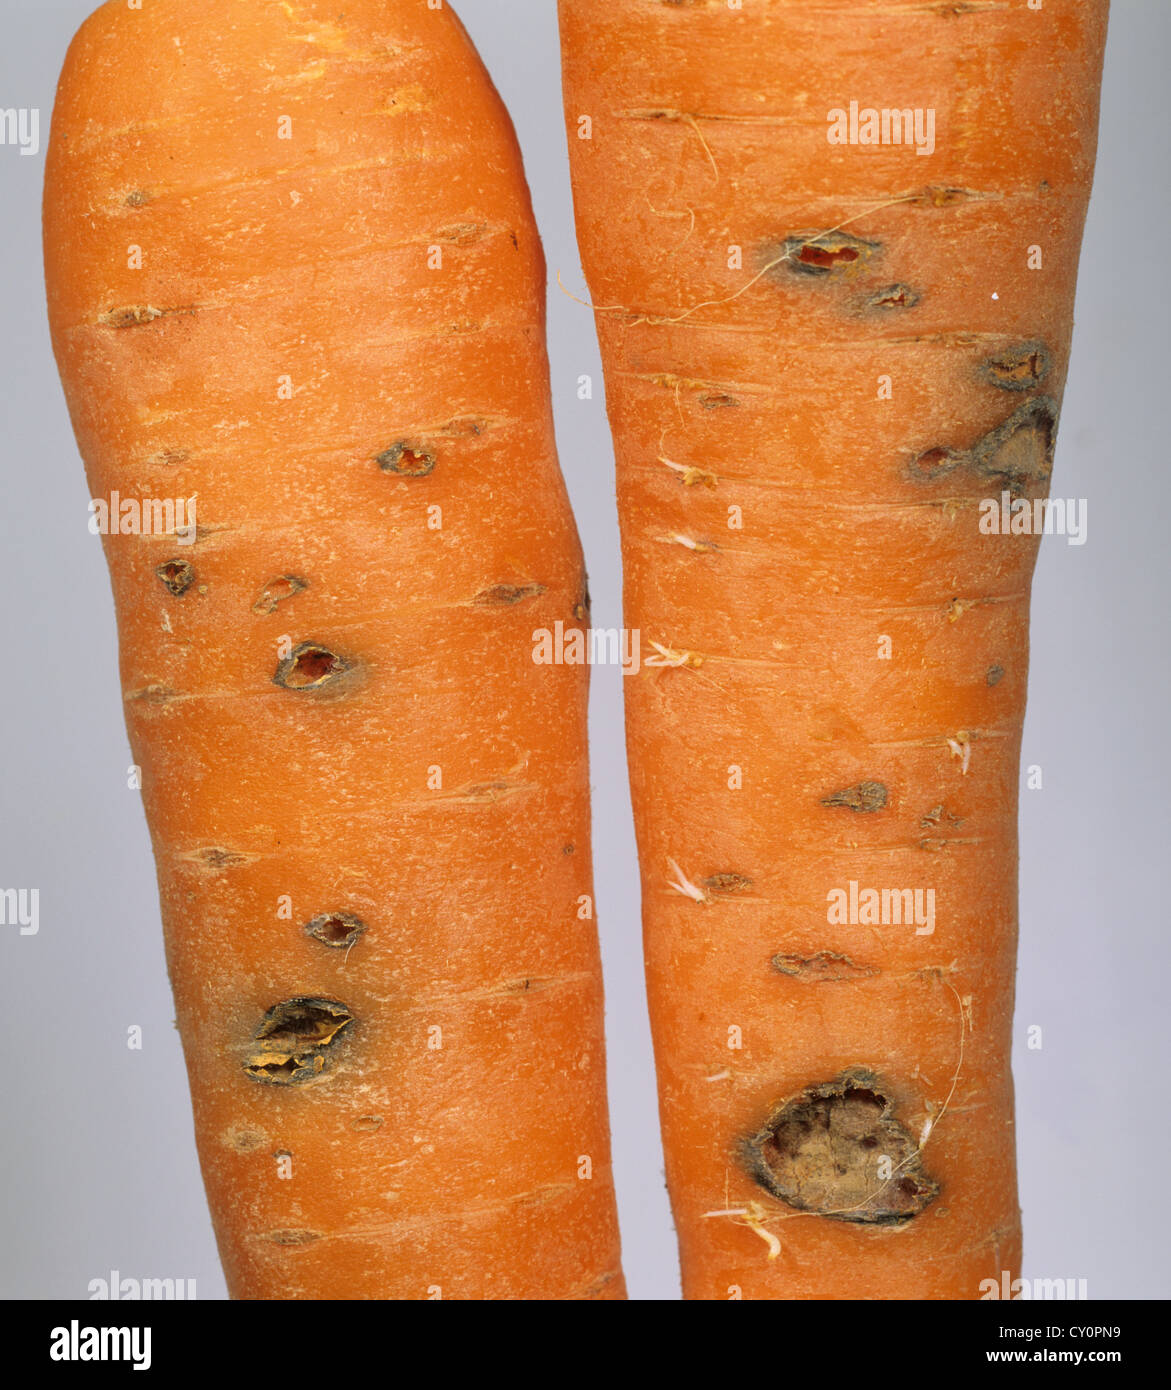 Cavity spot damage to a carrot root which results from several causes Stock Photo